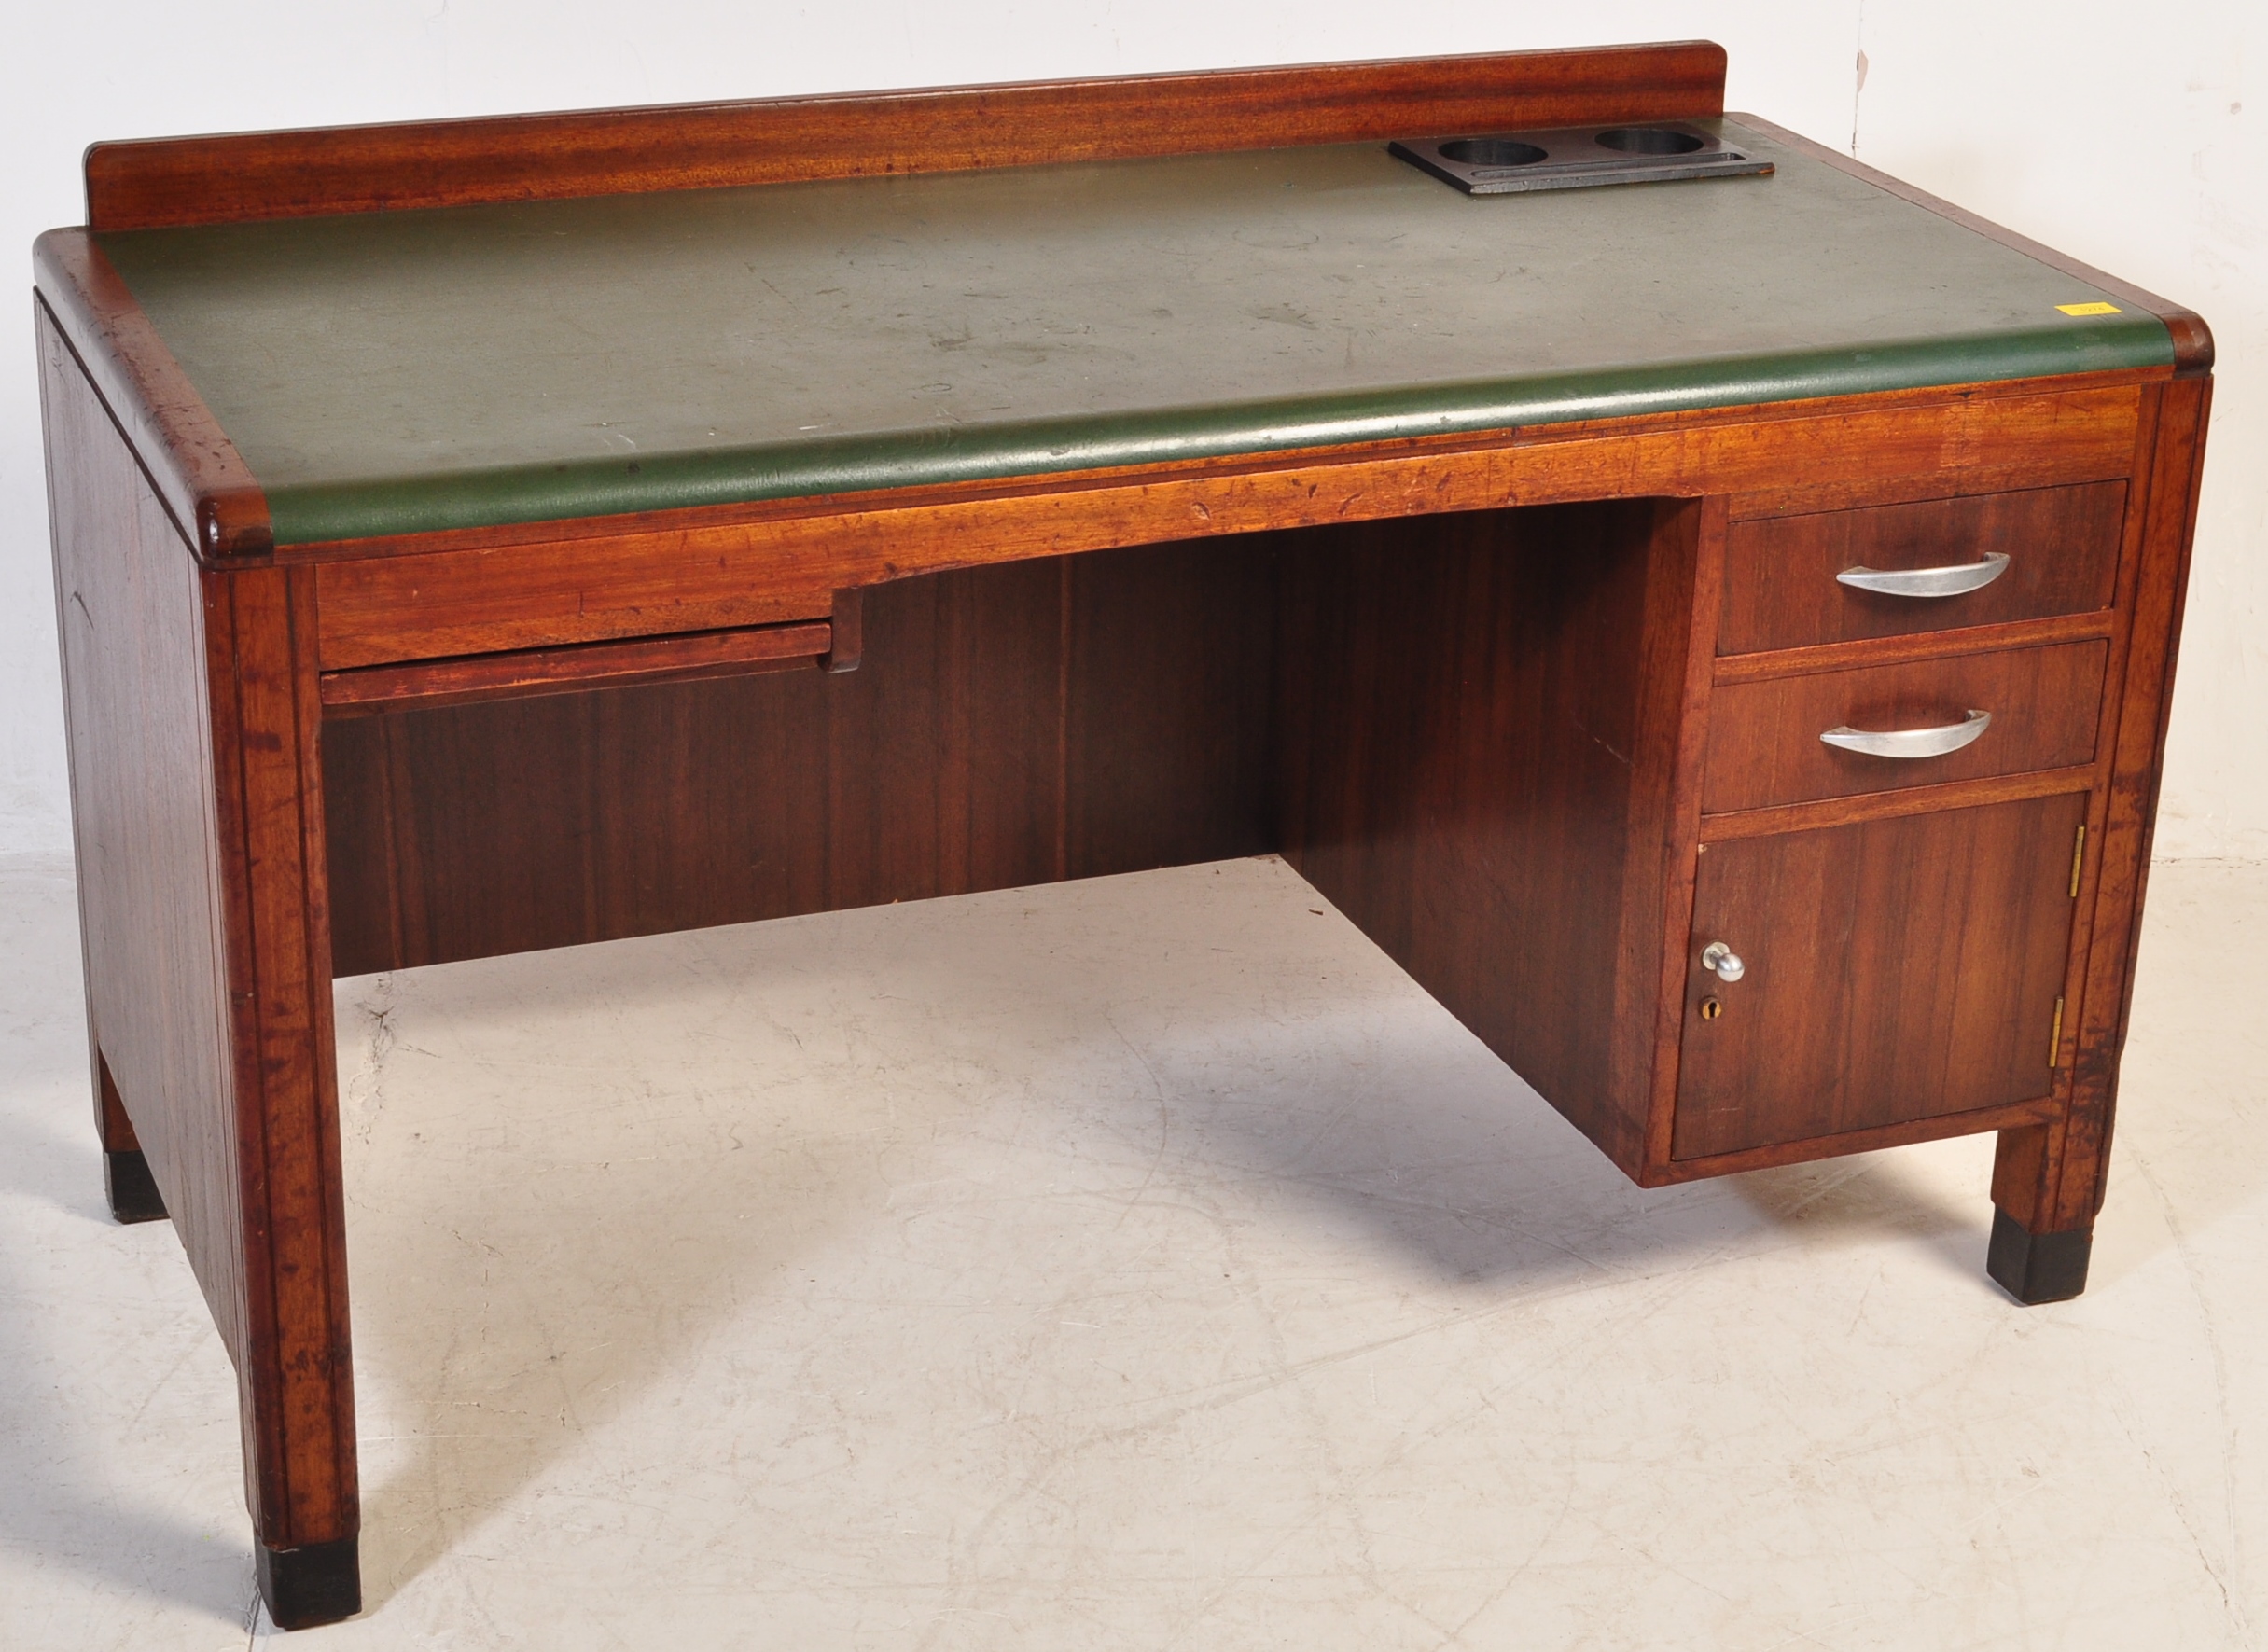 VINTAGE 20TH CENTURY OAK DESK WITH GREEN LEATHER WRITING SKIVER - Image 2 of 9